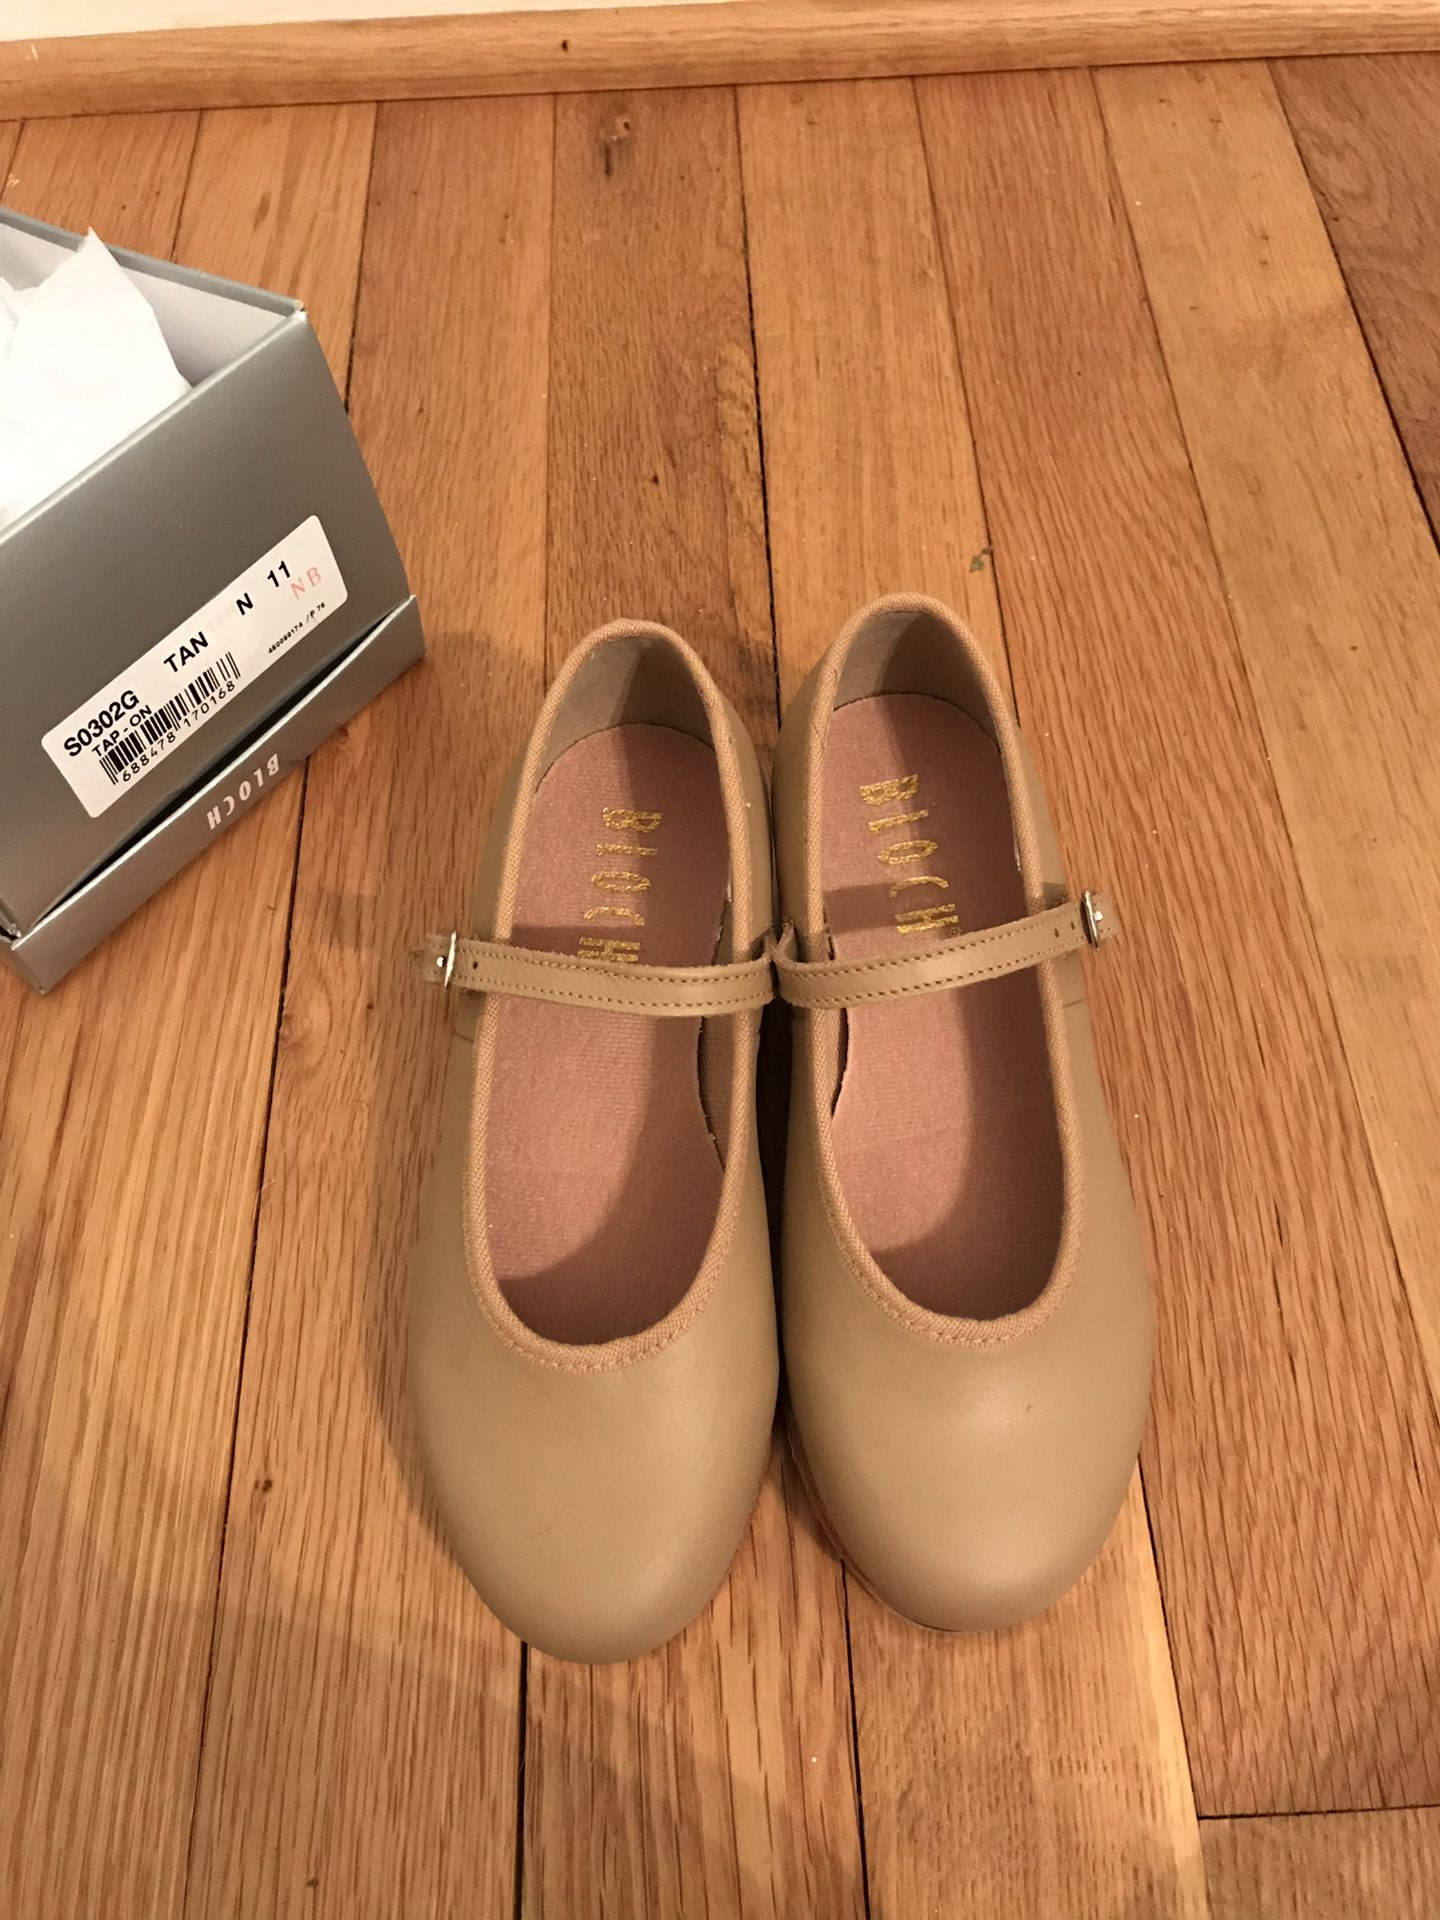 NEW Bloch Toddler Girls Leather Tap Shoes